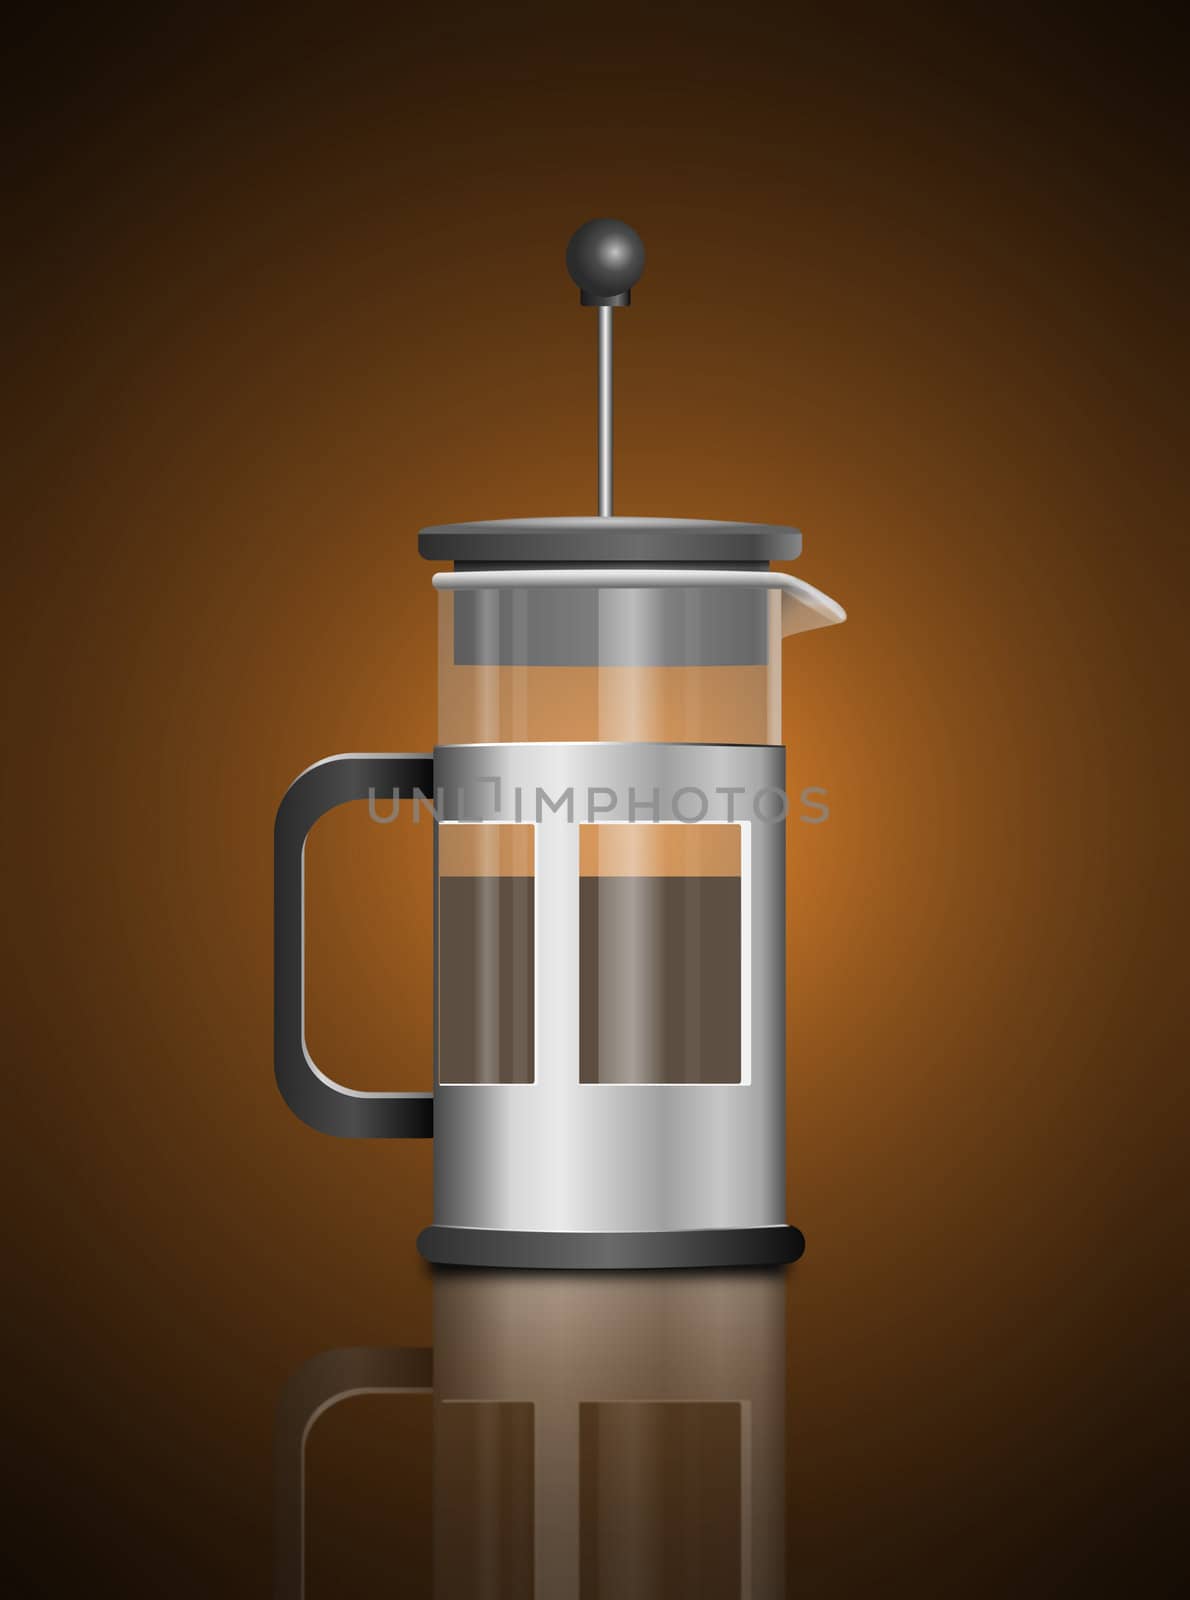 Illustration depicting a single chrome and glass cafetiere arranged over warm brown light effect.